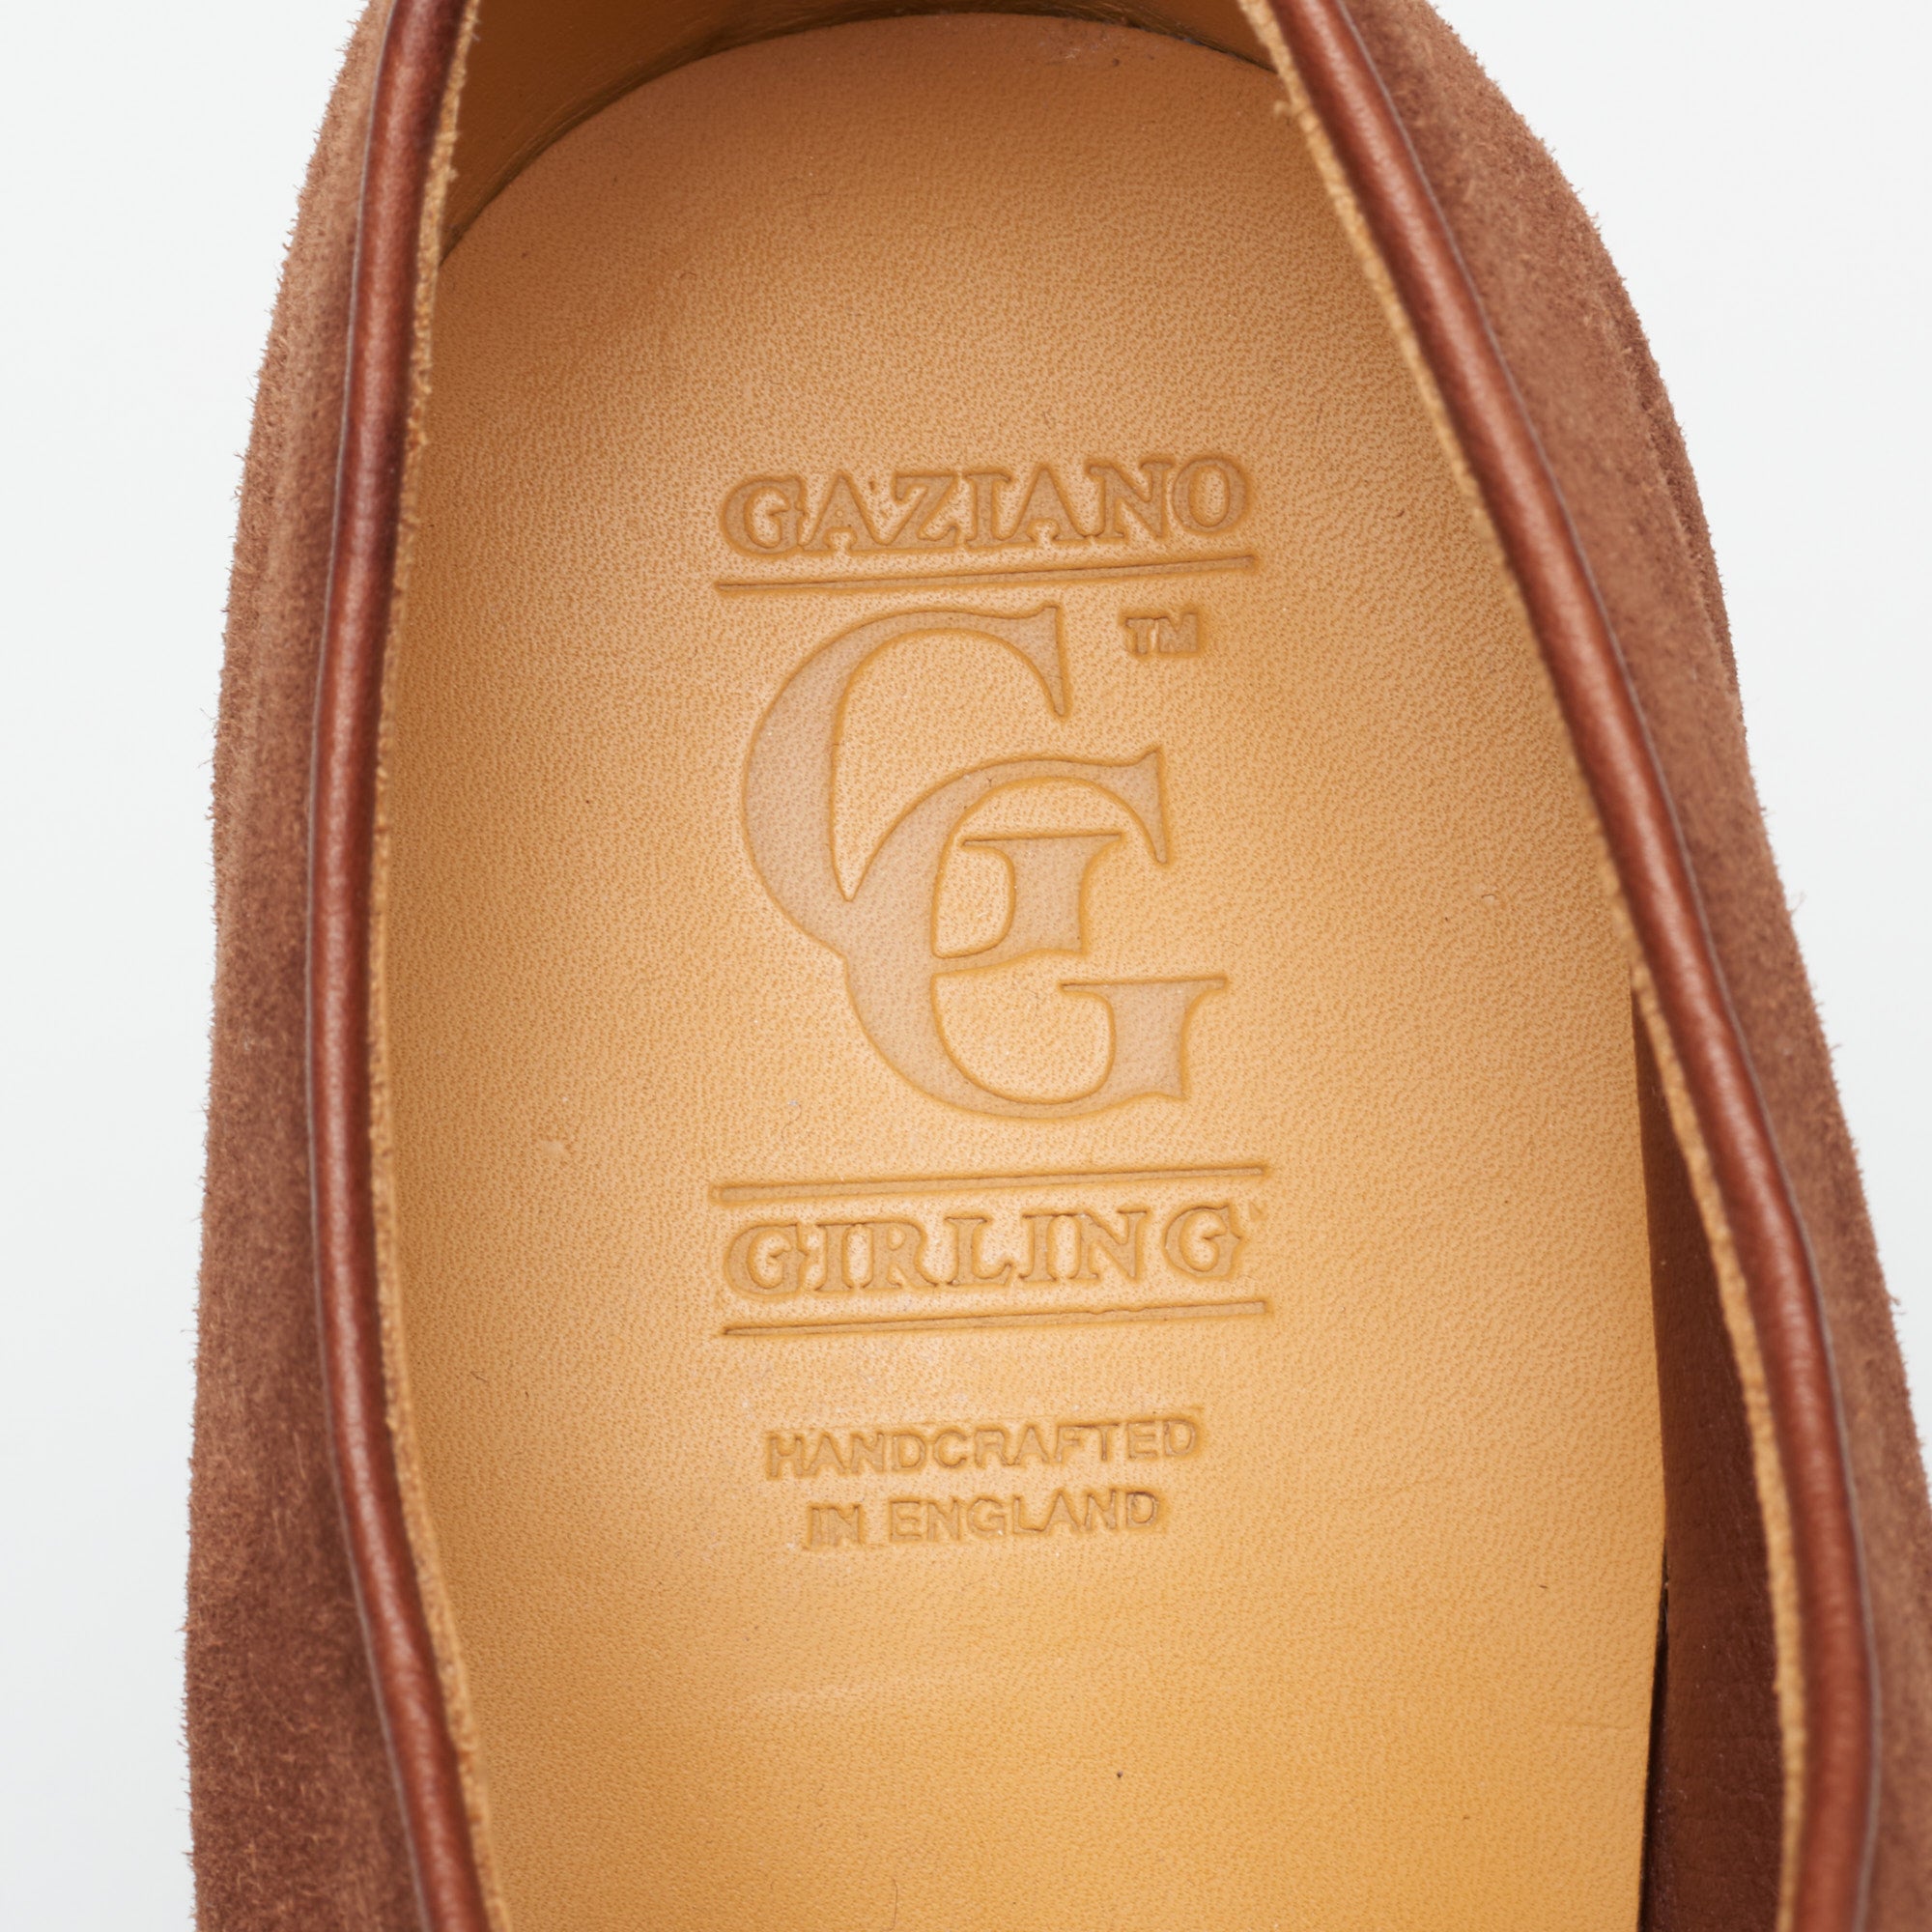 GAZIANO & GIRLING "Boscastle" Polo Suede Leather Derby Dress Shoes 8E US 8.5 Last MH71 GAZIANO & GIRLING